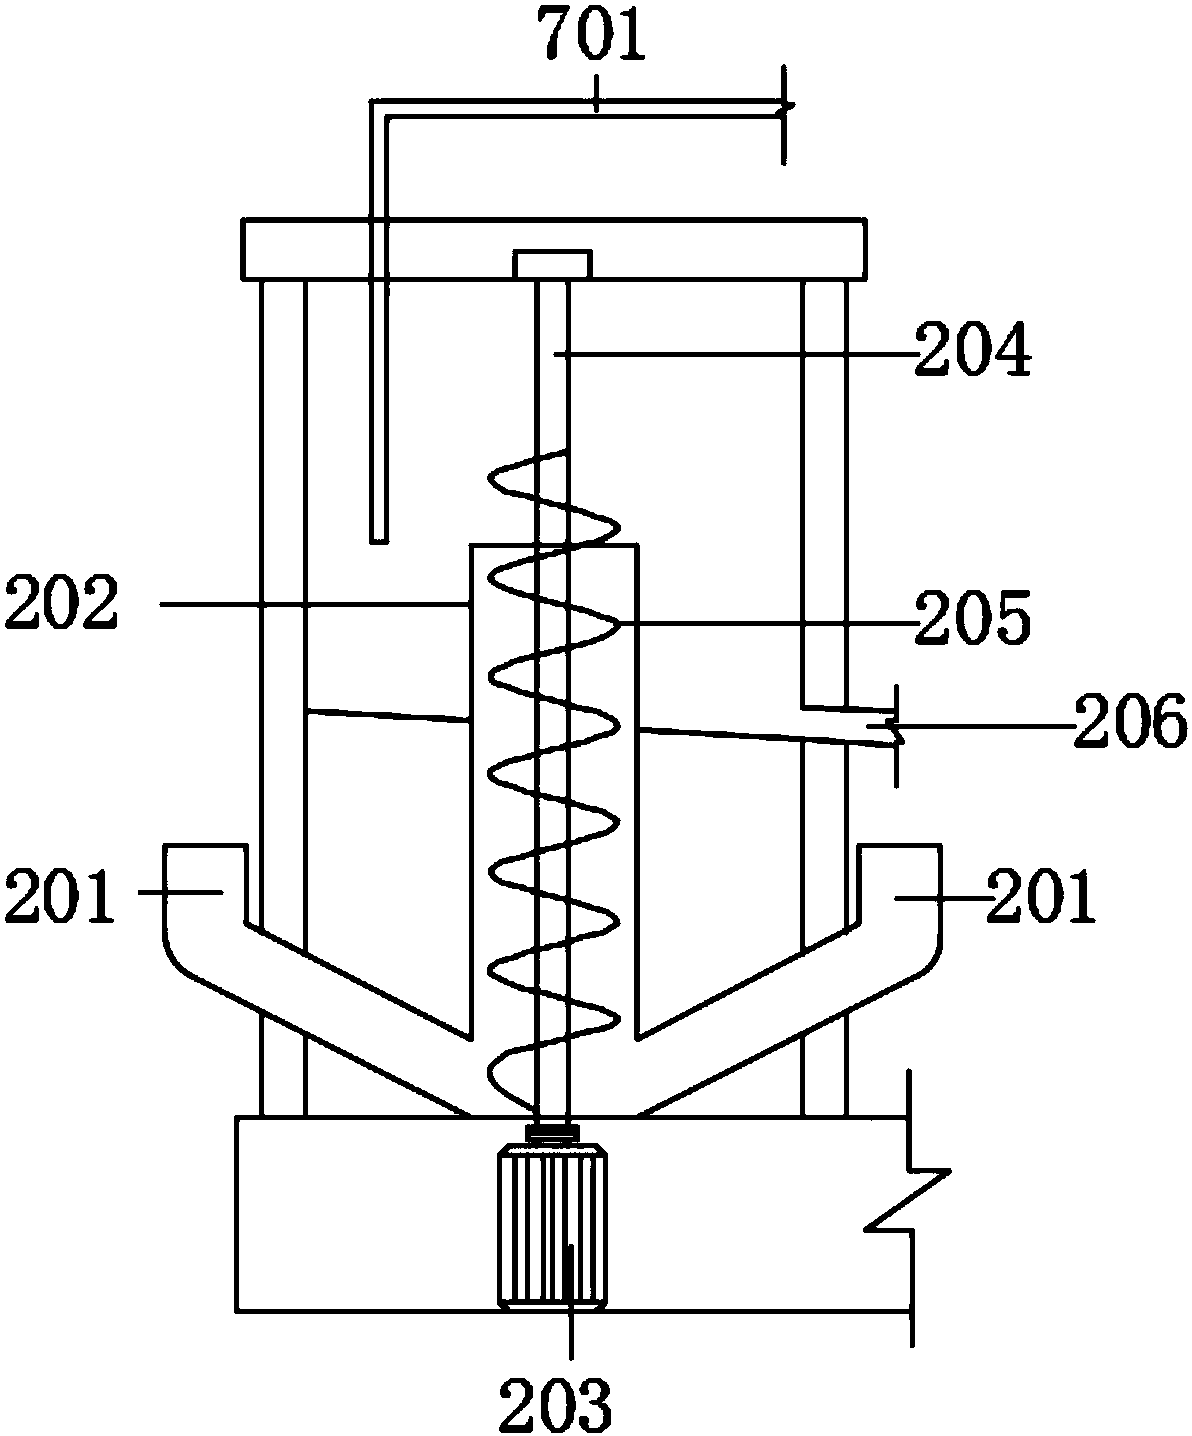 Cooling crystallization device of potassium nitrate